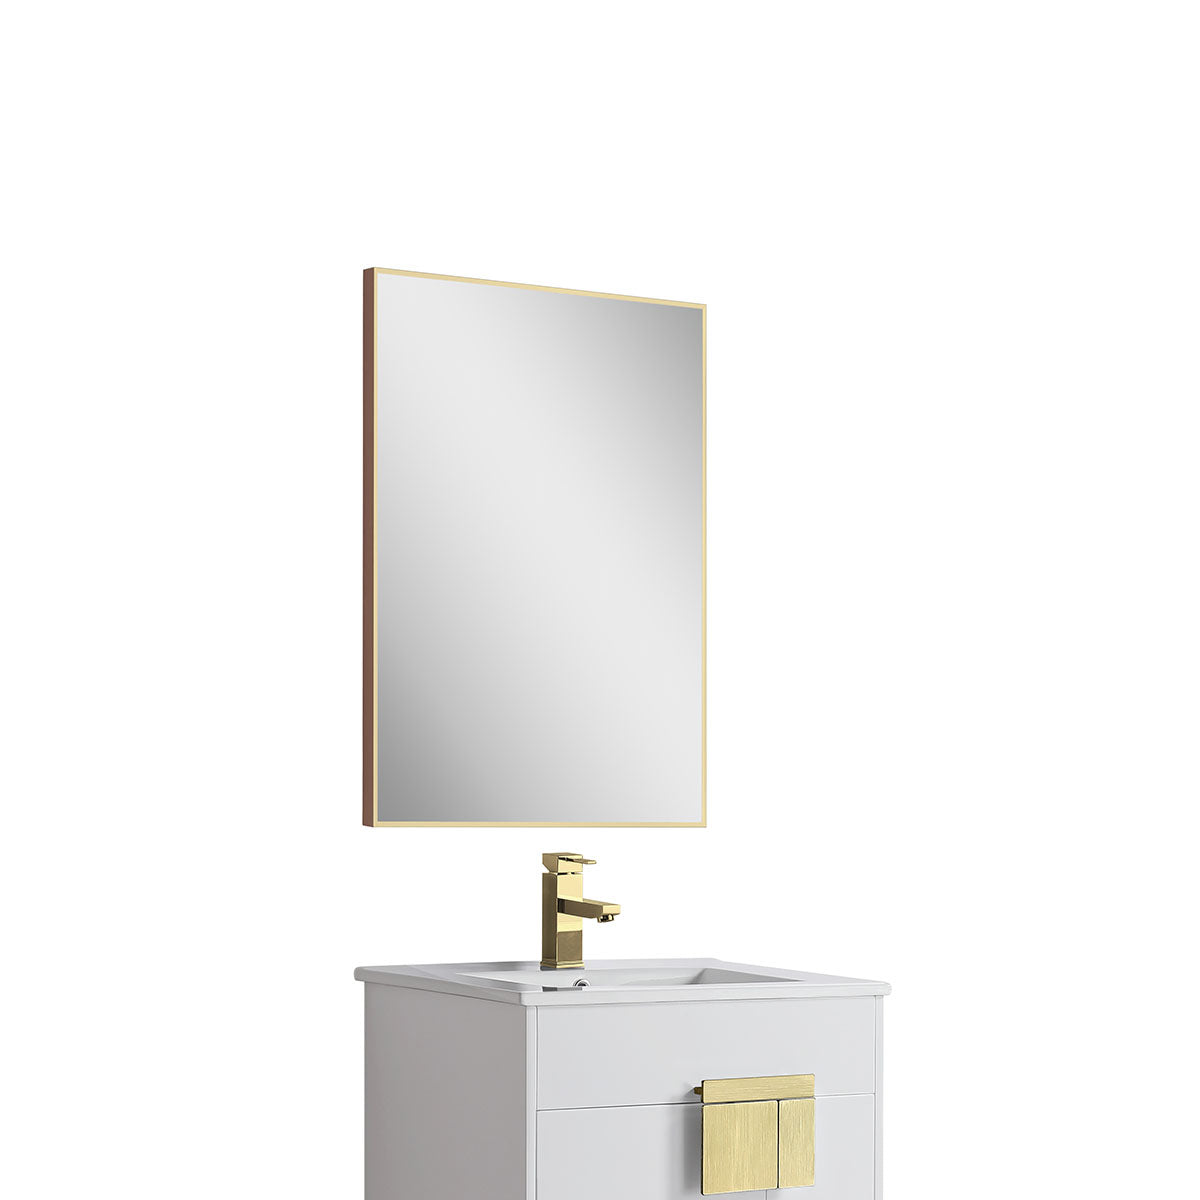 24"w x 32"h Aluminum Rectangle Bathroom Wall Mirror (Brushed Gold) - iStyle Bath